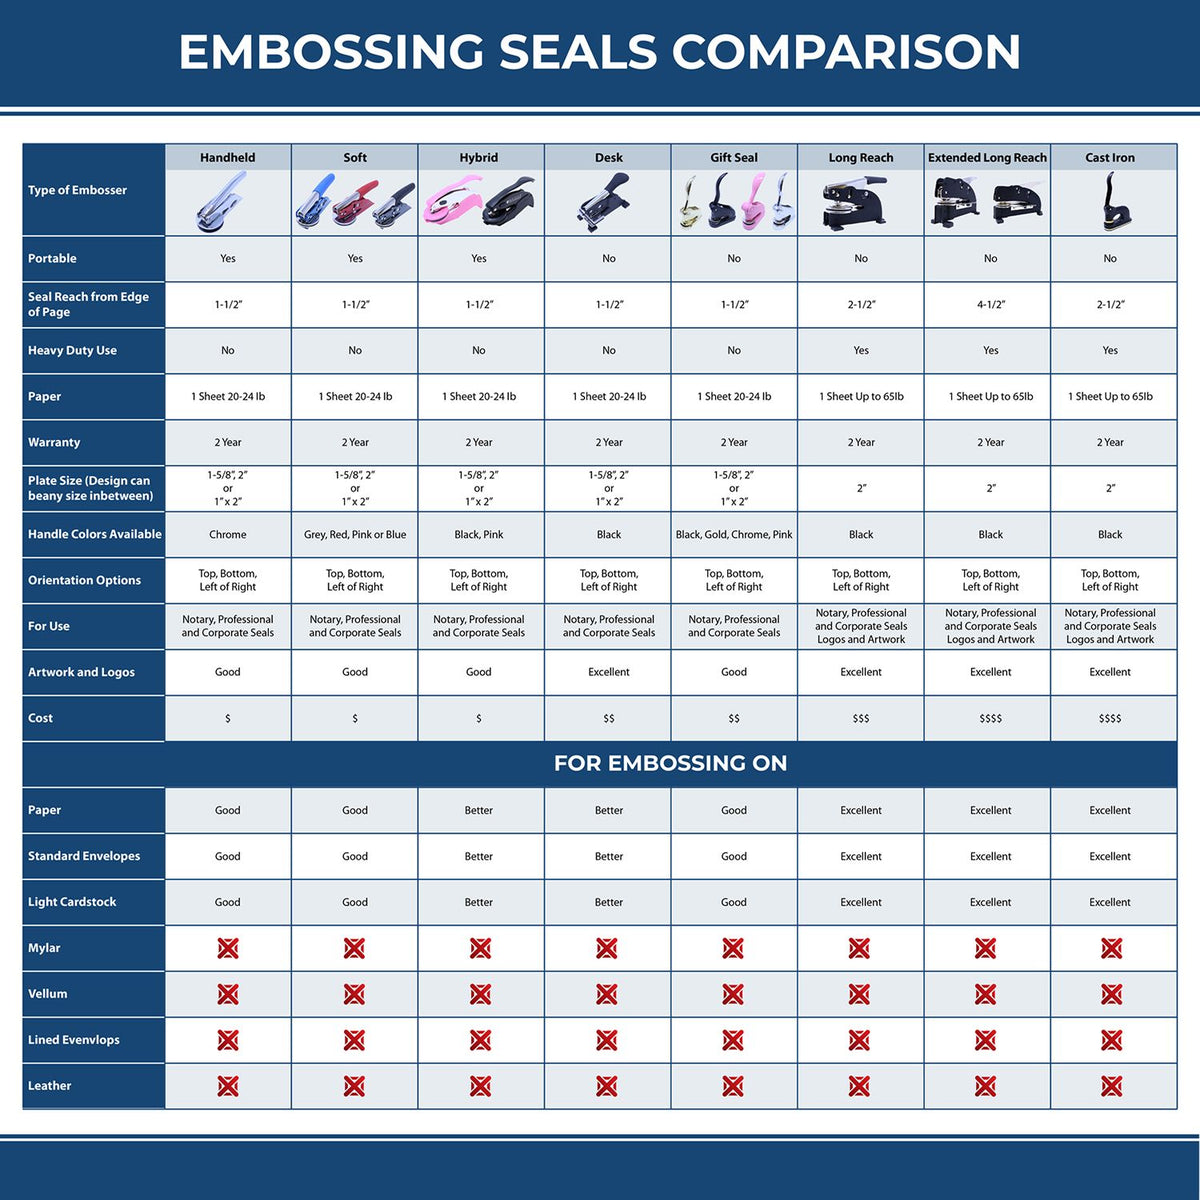 A comparison chart for the different types of mount models available for the Hybrid Florida Geologist Seal